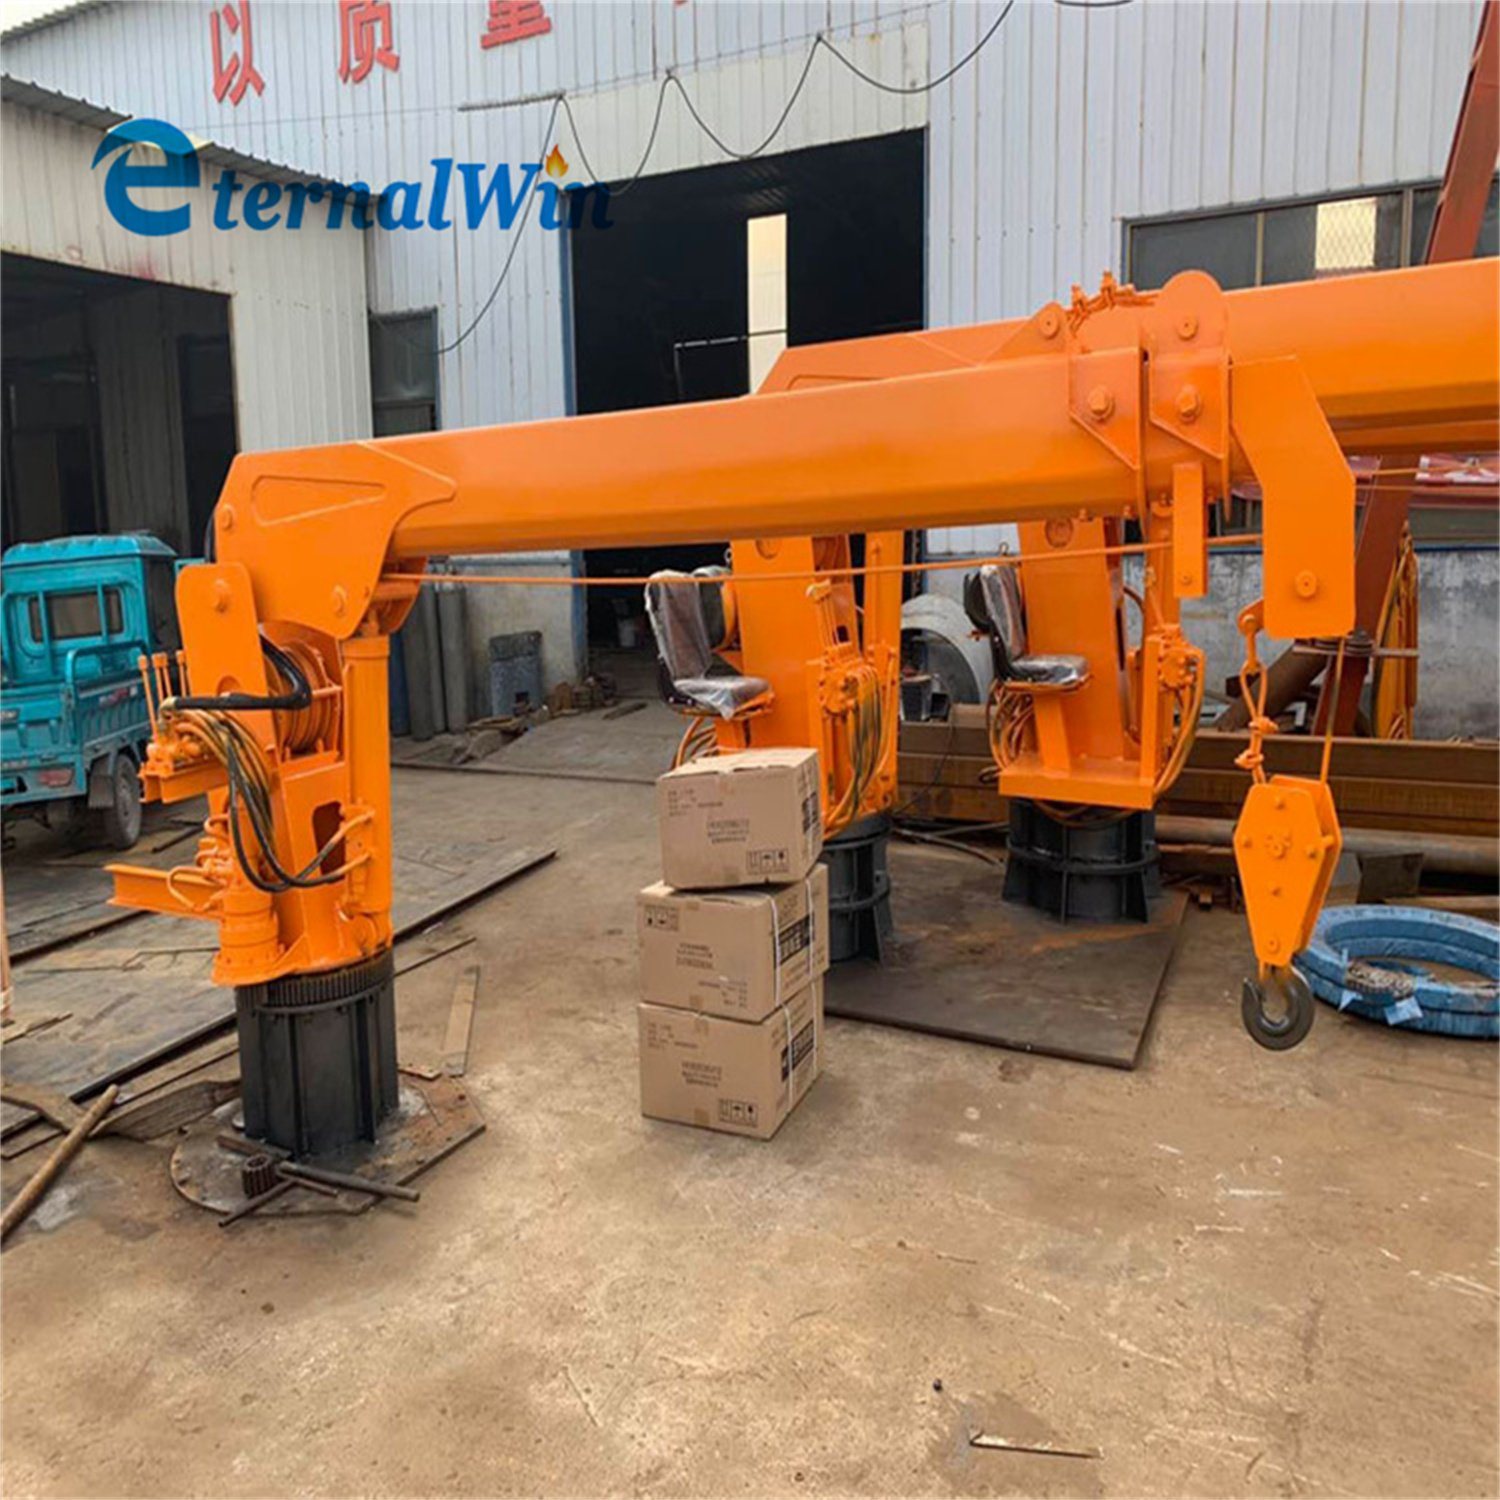 ABS/CCS Certified Knuckle Boom Marine Crane for Fishing Commercial Navy Ship